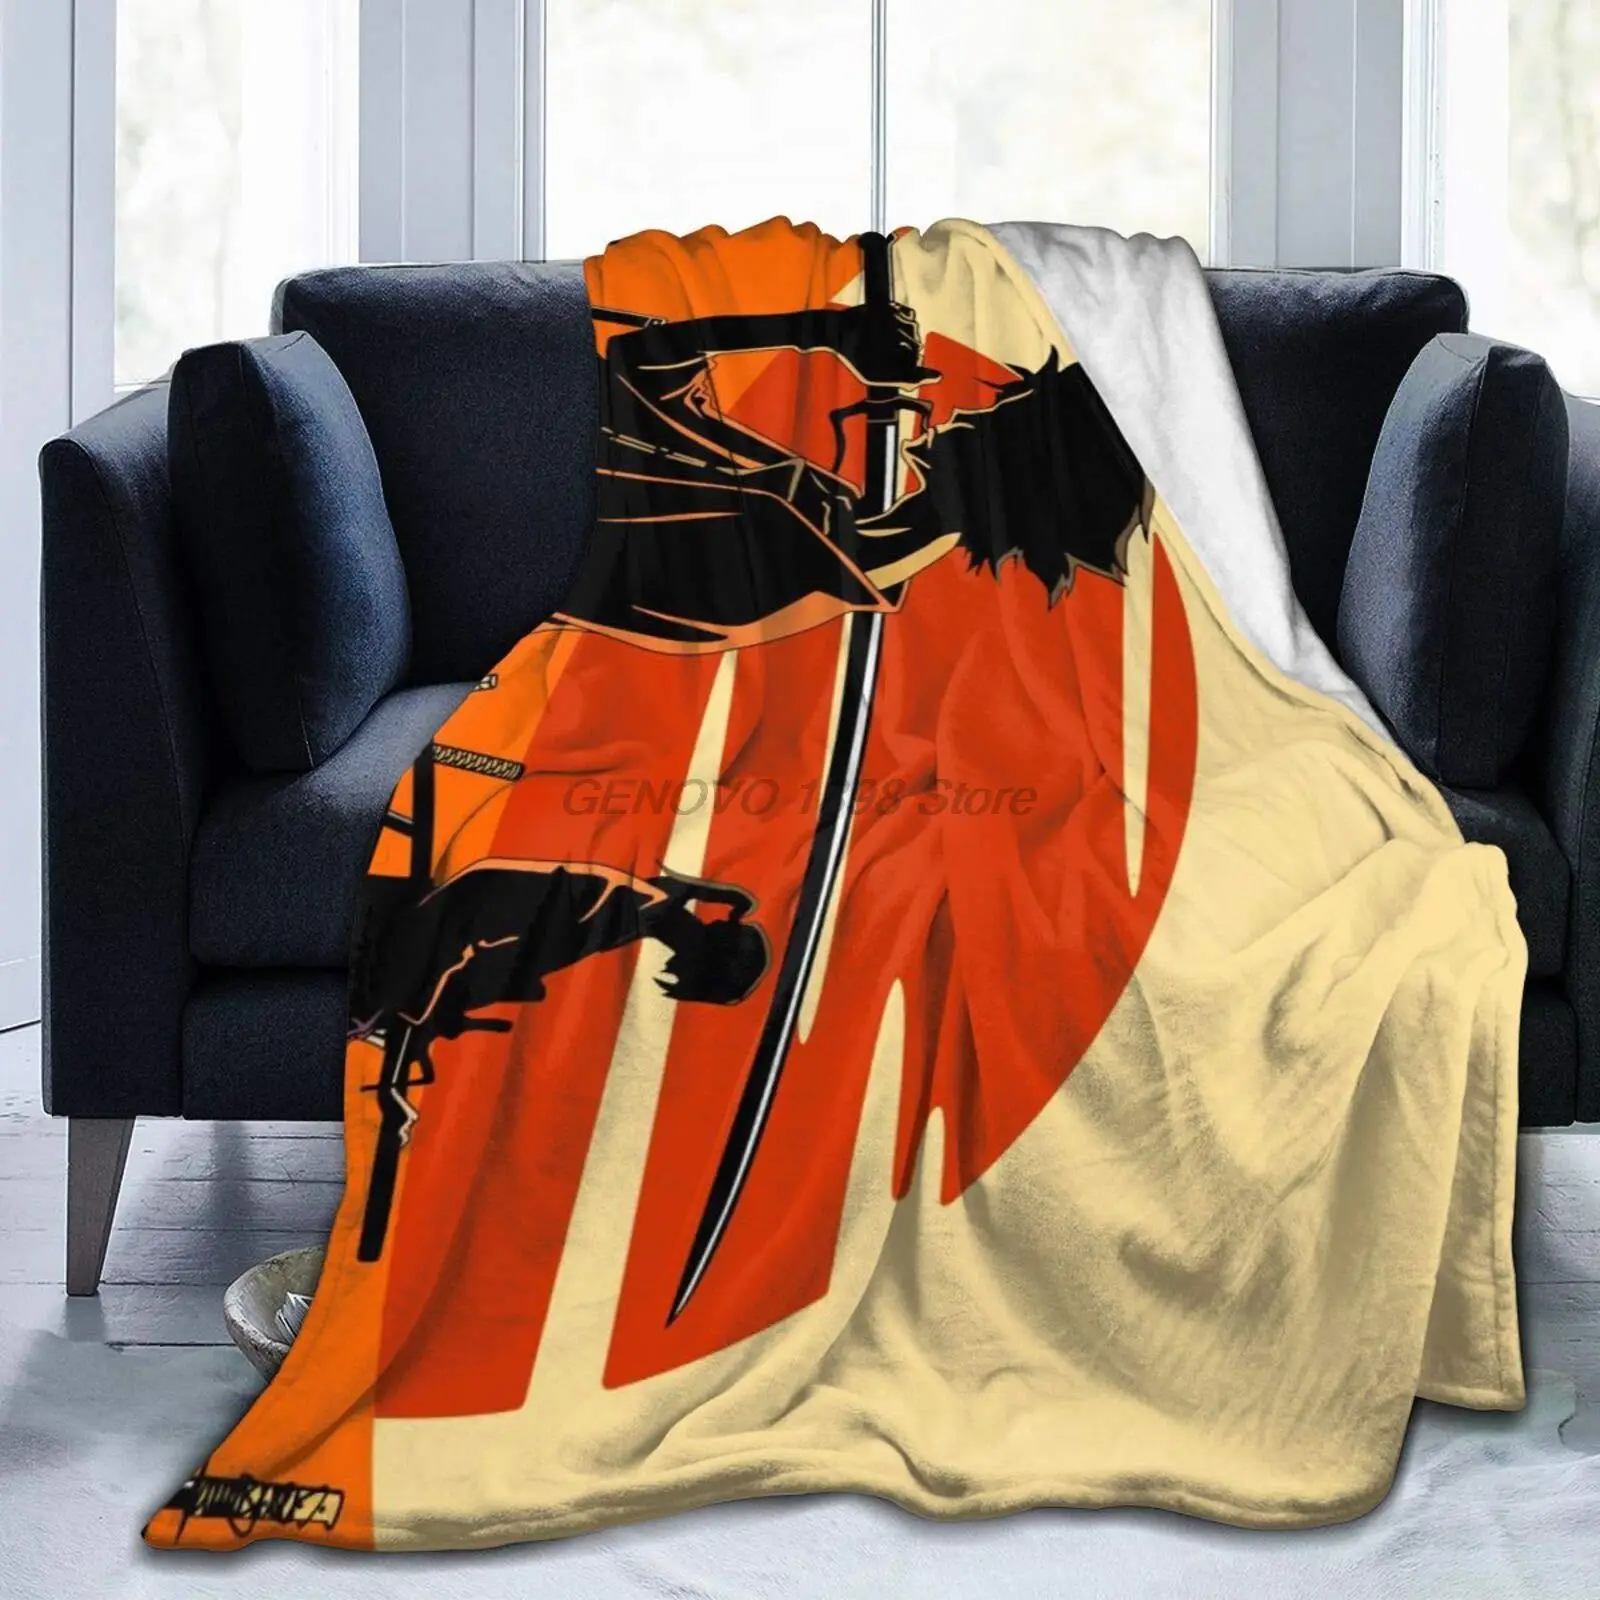 

Afro Samurai Bed Blanket for Couch/Living Room/Warm Winter Cozy Plush Throw Blankets for Adults Or Kids